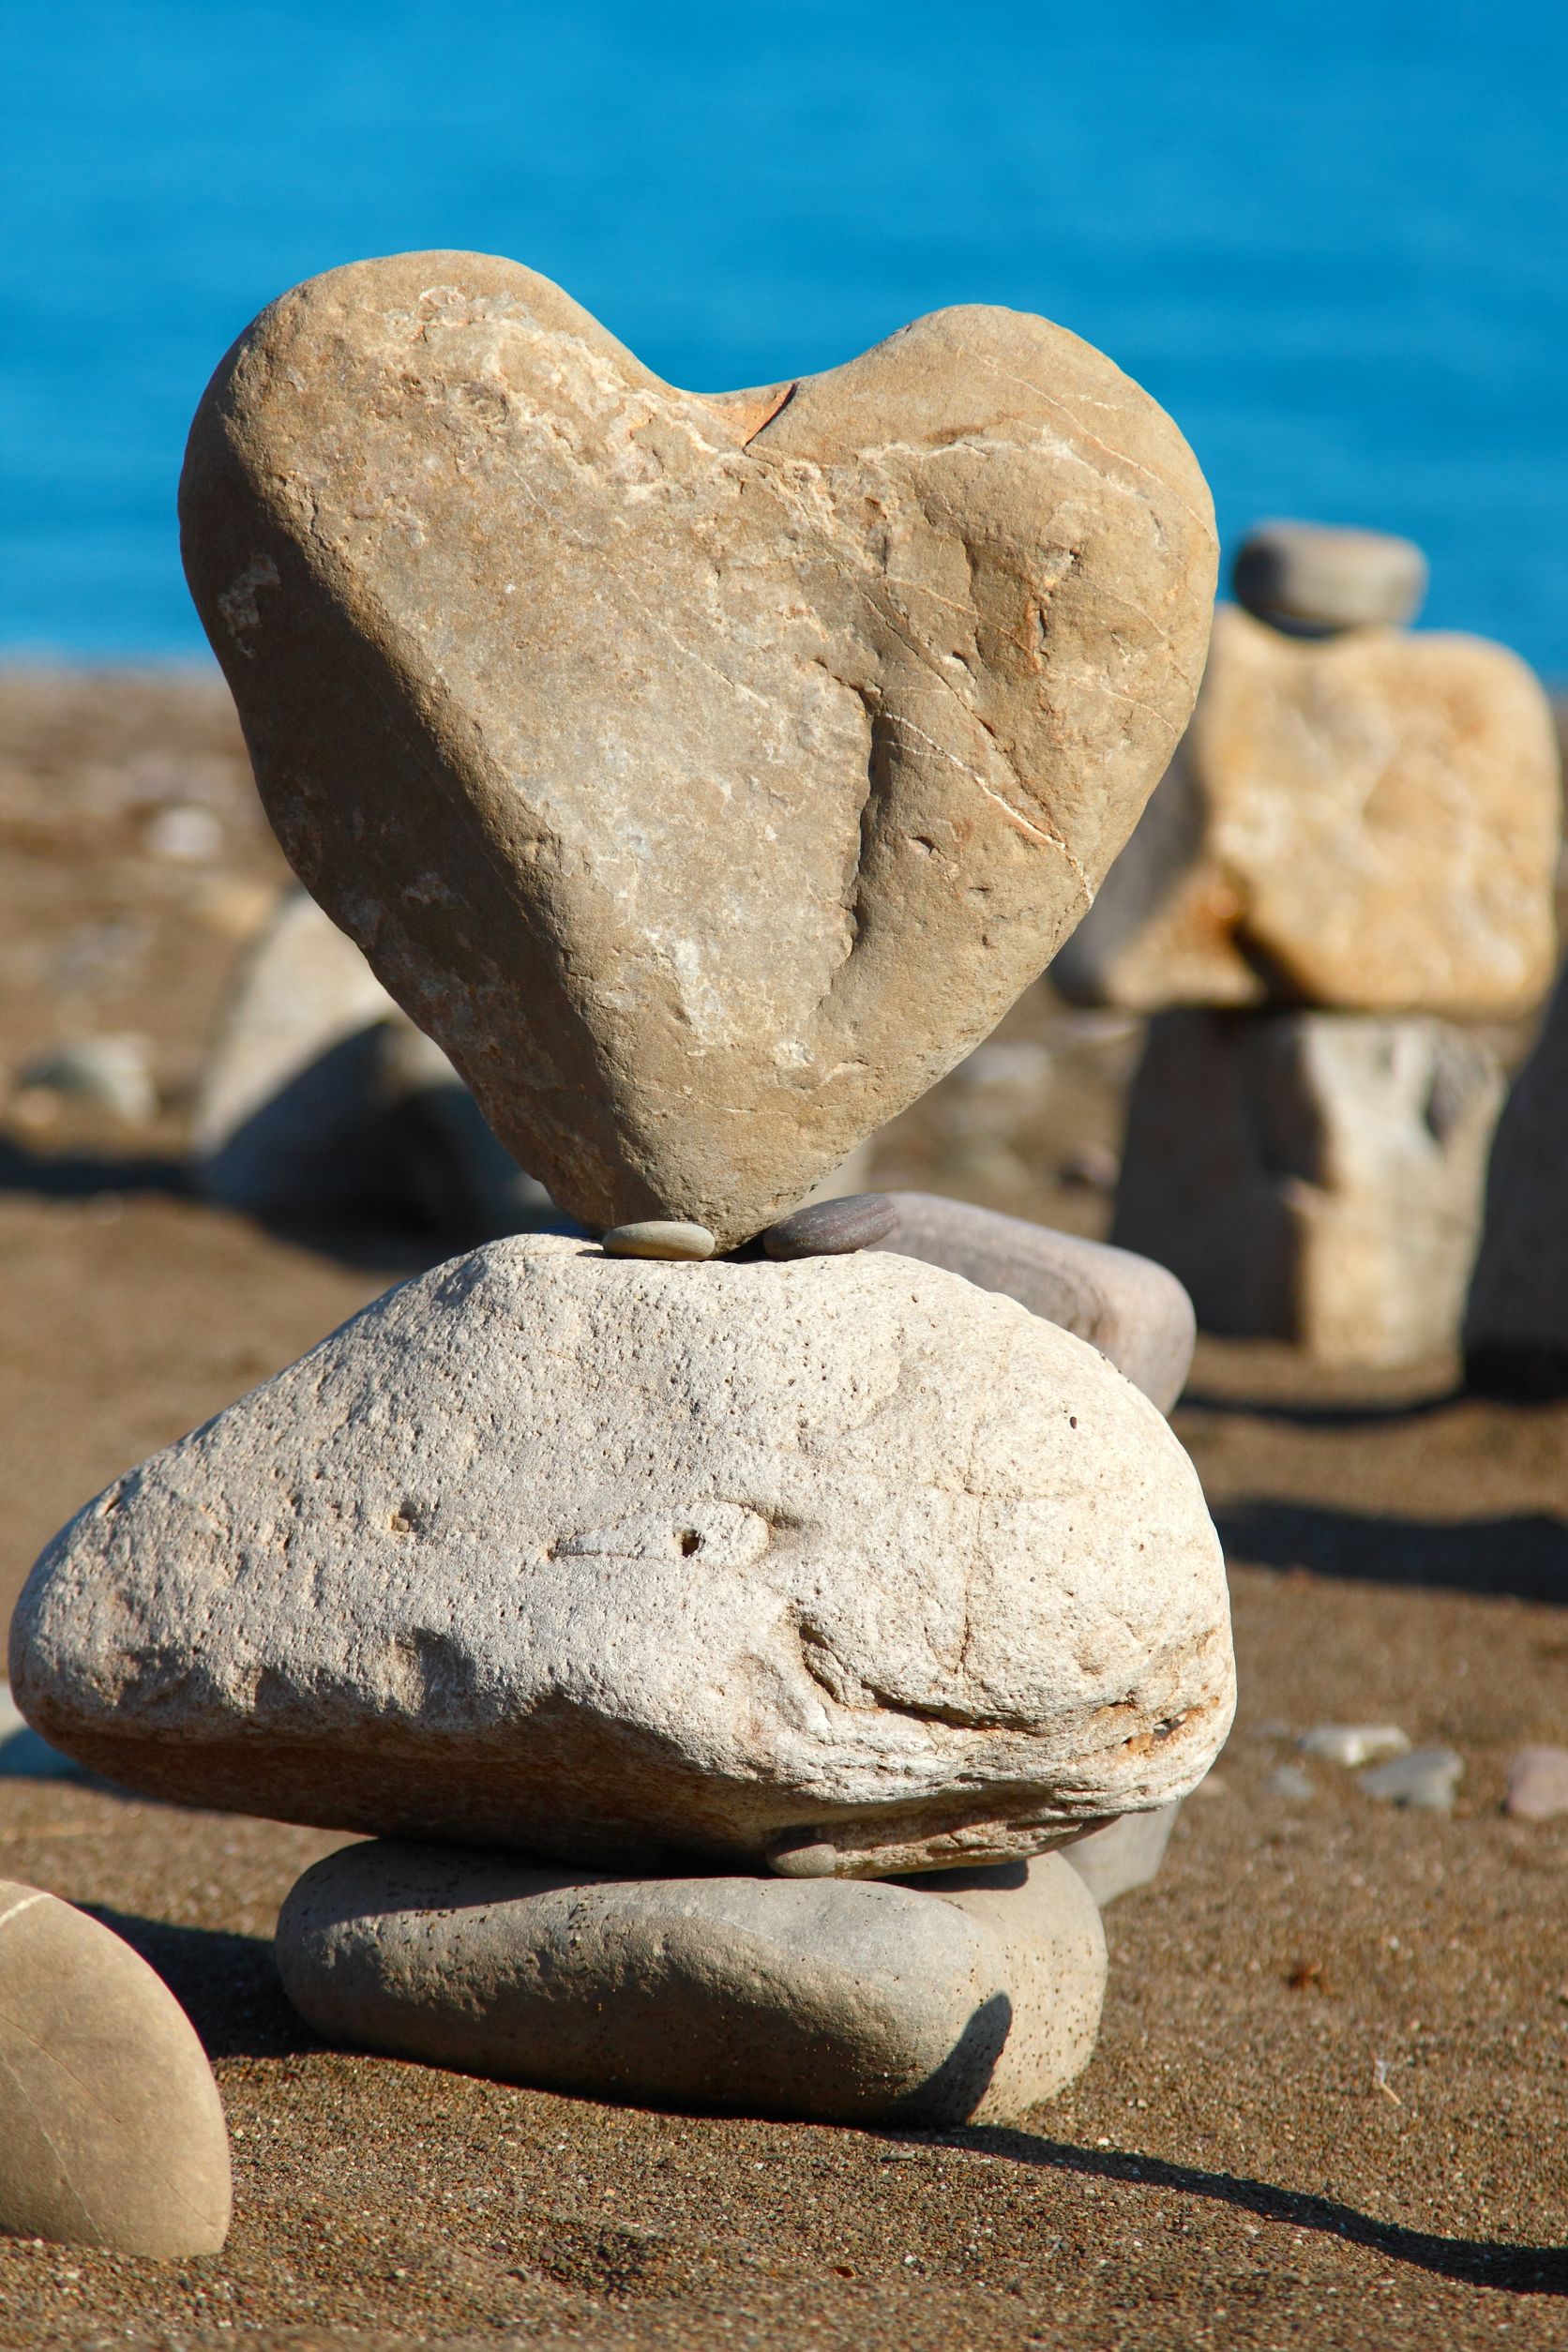 16062164 - heart of rock with balanced stones, pebbles stacks against blue sea